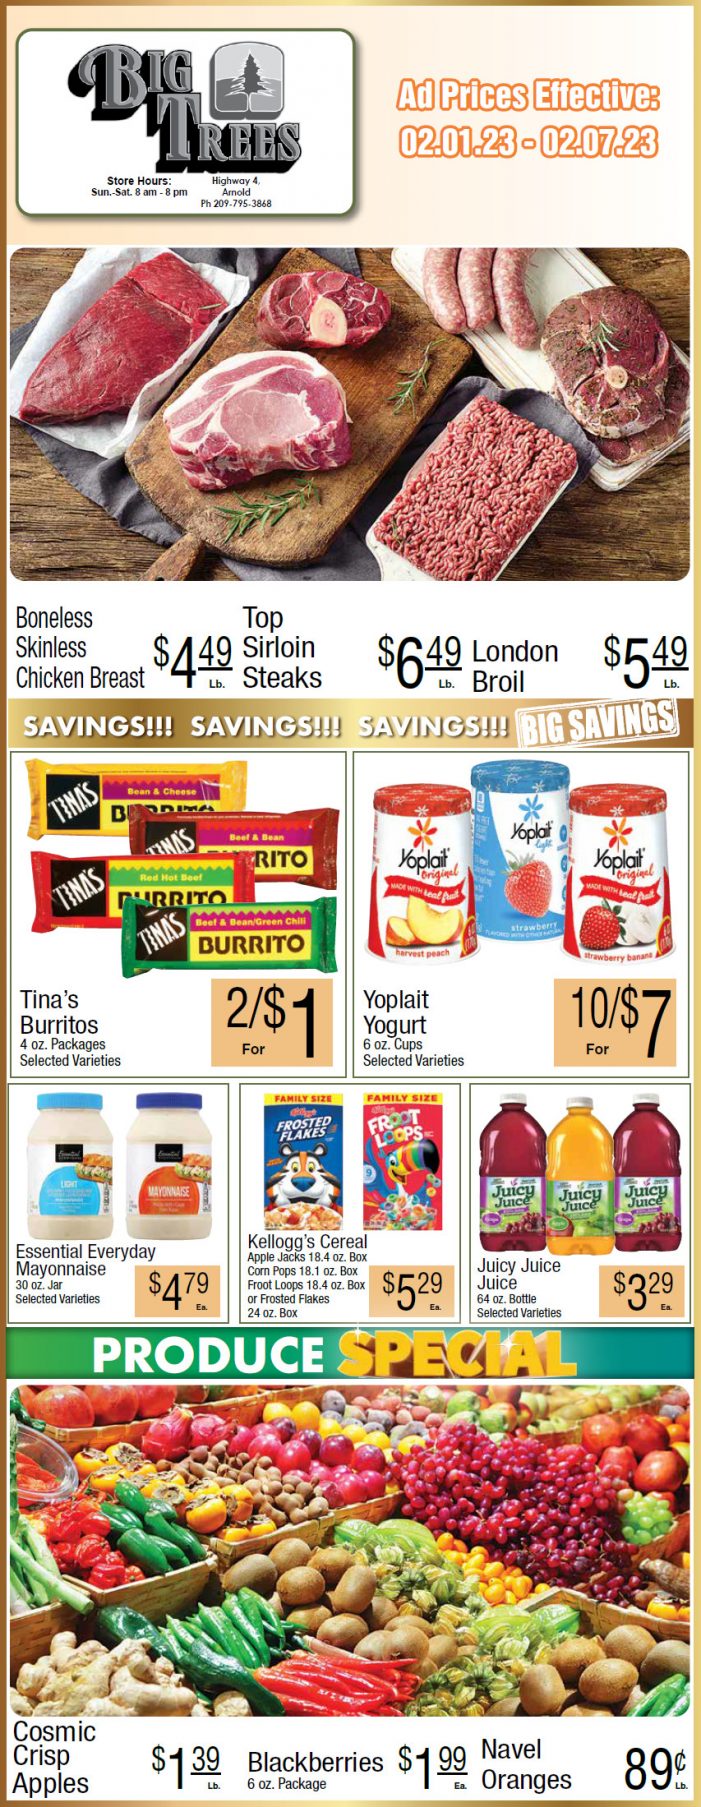 Big Trees Market Weekly Ad & Grocery Specials February 1 – 7th!  Shop Local & Save!!